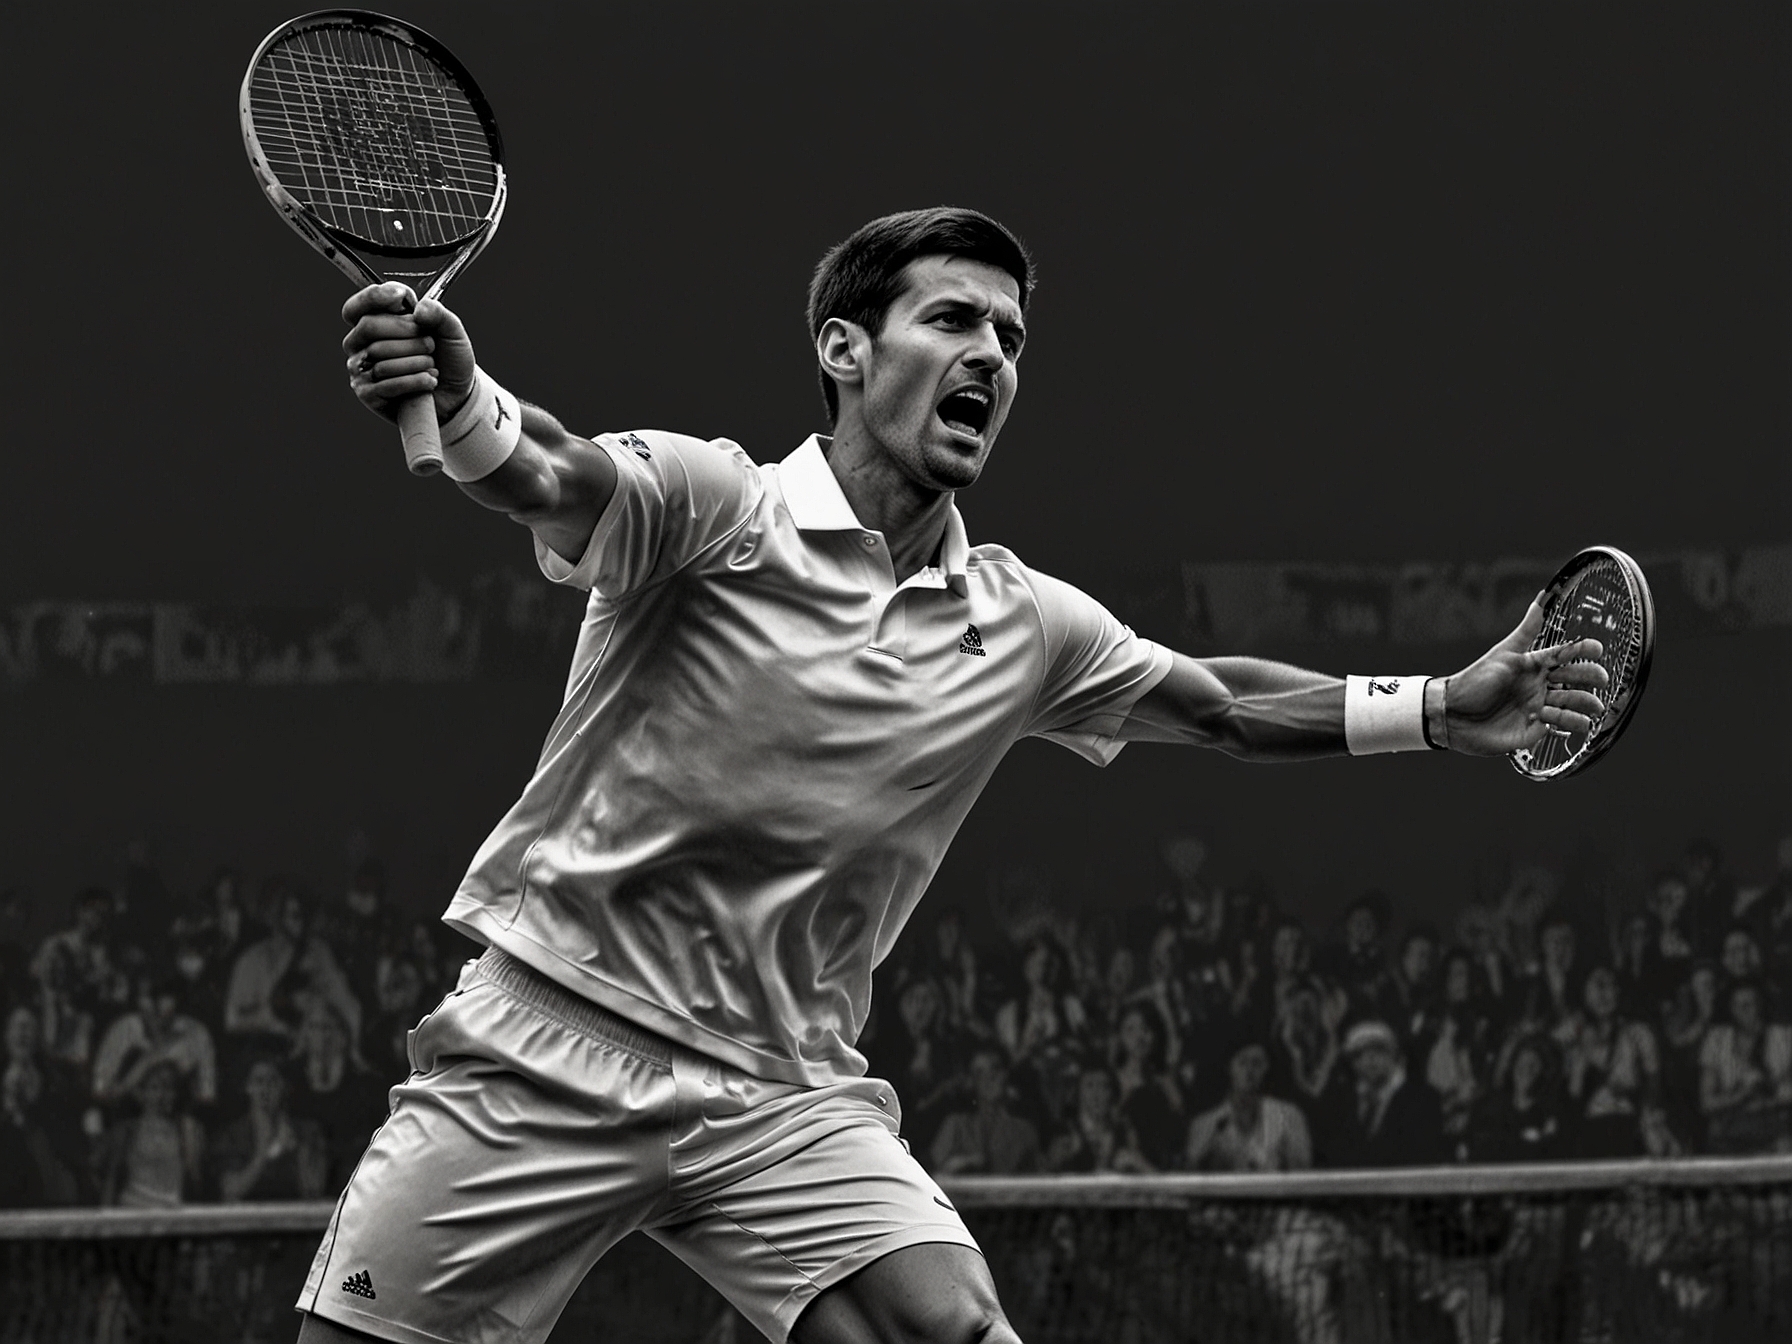 Novak Djokovic, in action on the tennis court, showcasing his powerful serve post-elbow surgery, a testament to his determination and recovery journey.